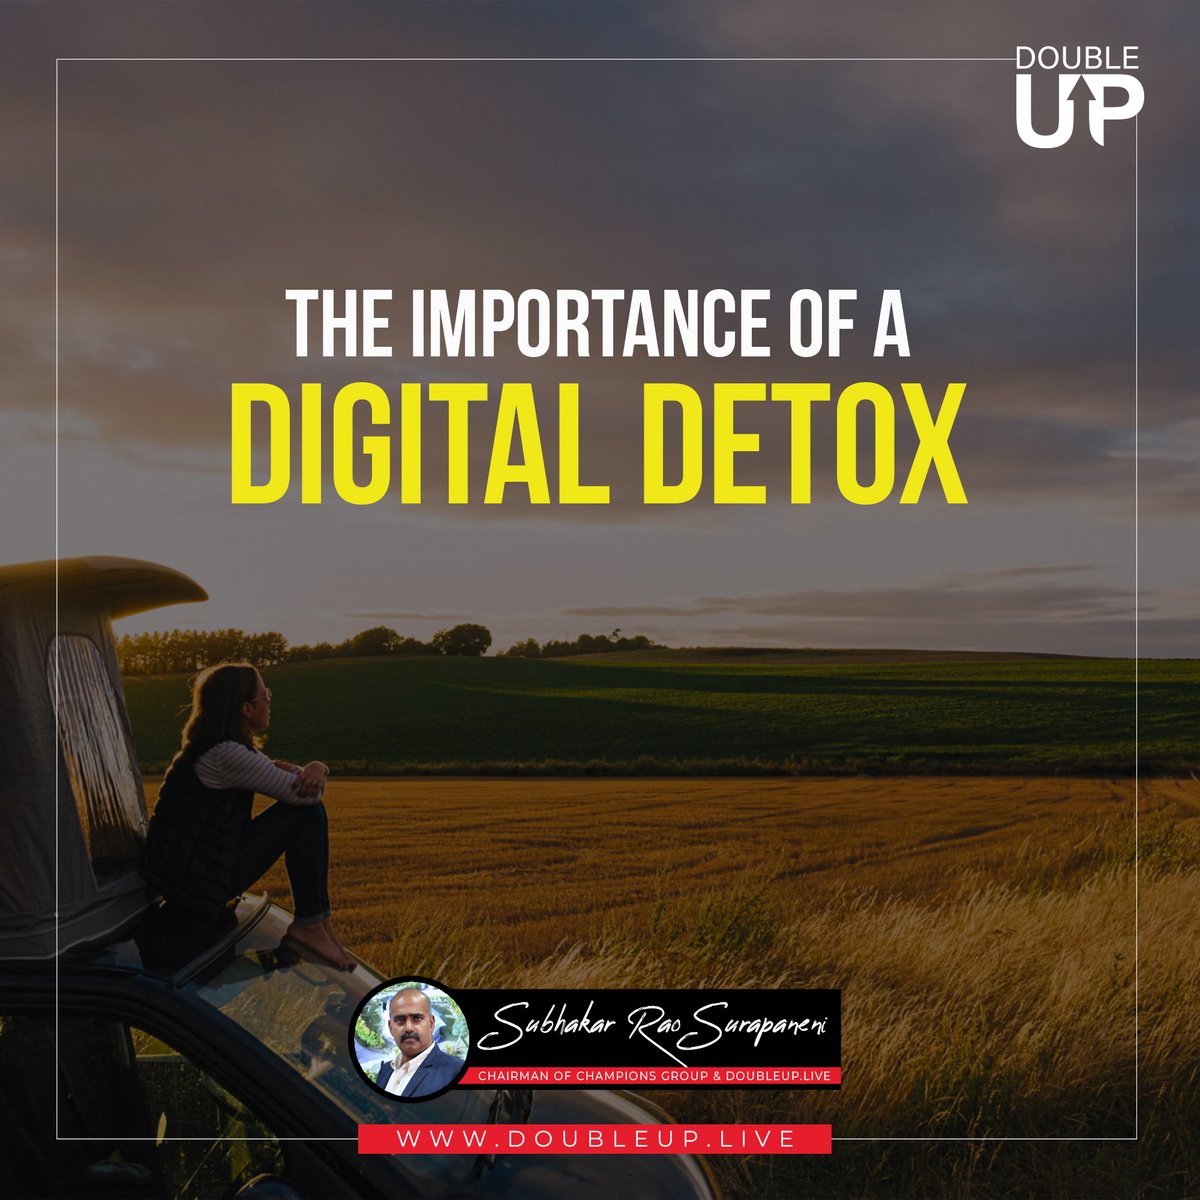 🌿 Embracing a digital detox for better mental health! It's crucial to take breaks from screens to recharge and reconnect with ourselves and our loved ones. 📵✨ #DigitalDetox #MentalWellbeing #SelfCare #DisconnectToReconnect #Mindfulness #UnplugAndRecharge #DoubleUp #SubhakarRao